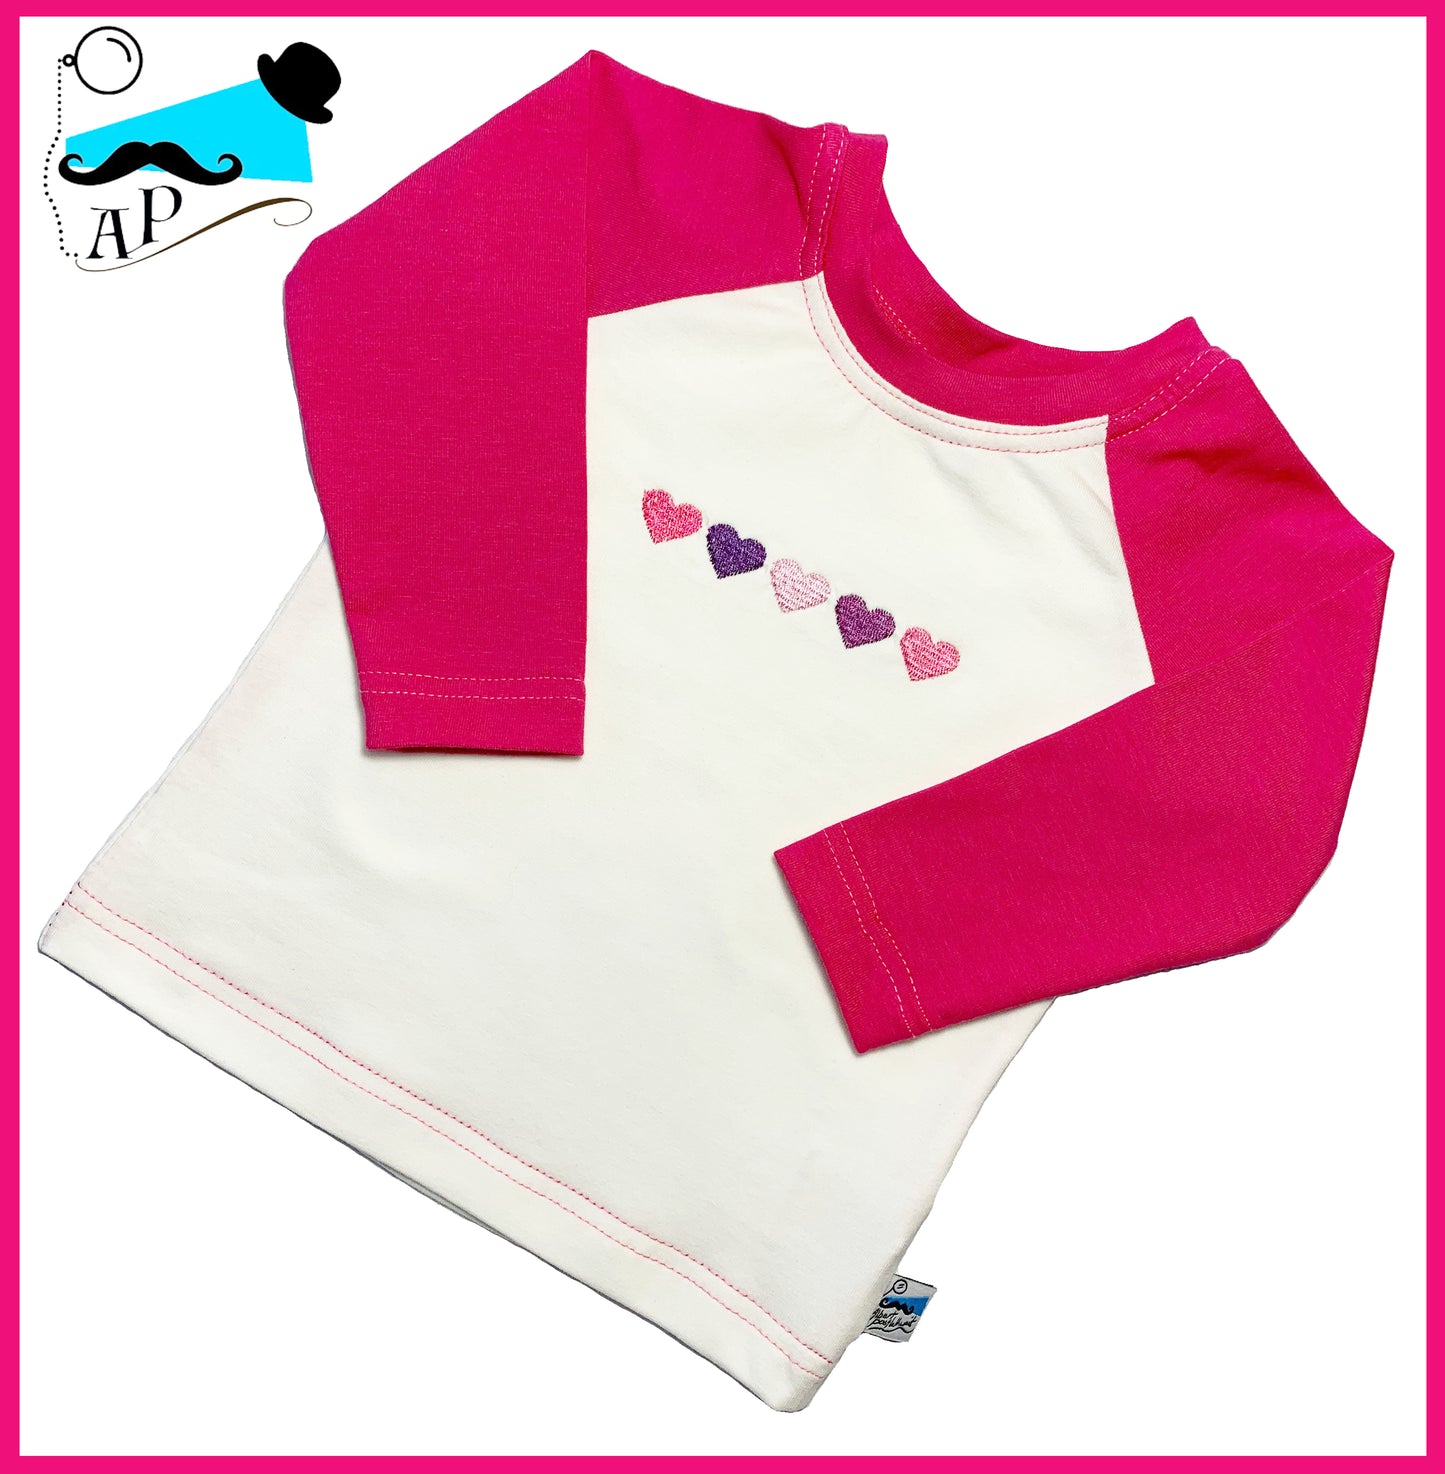 Embroidered Heart T-shirt 6-12 months